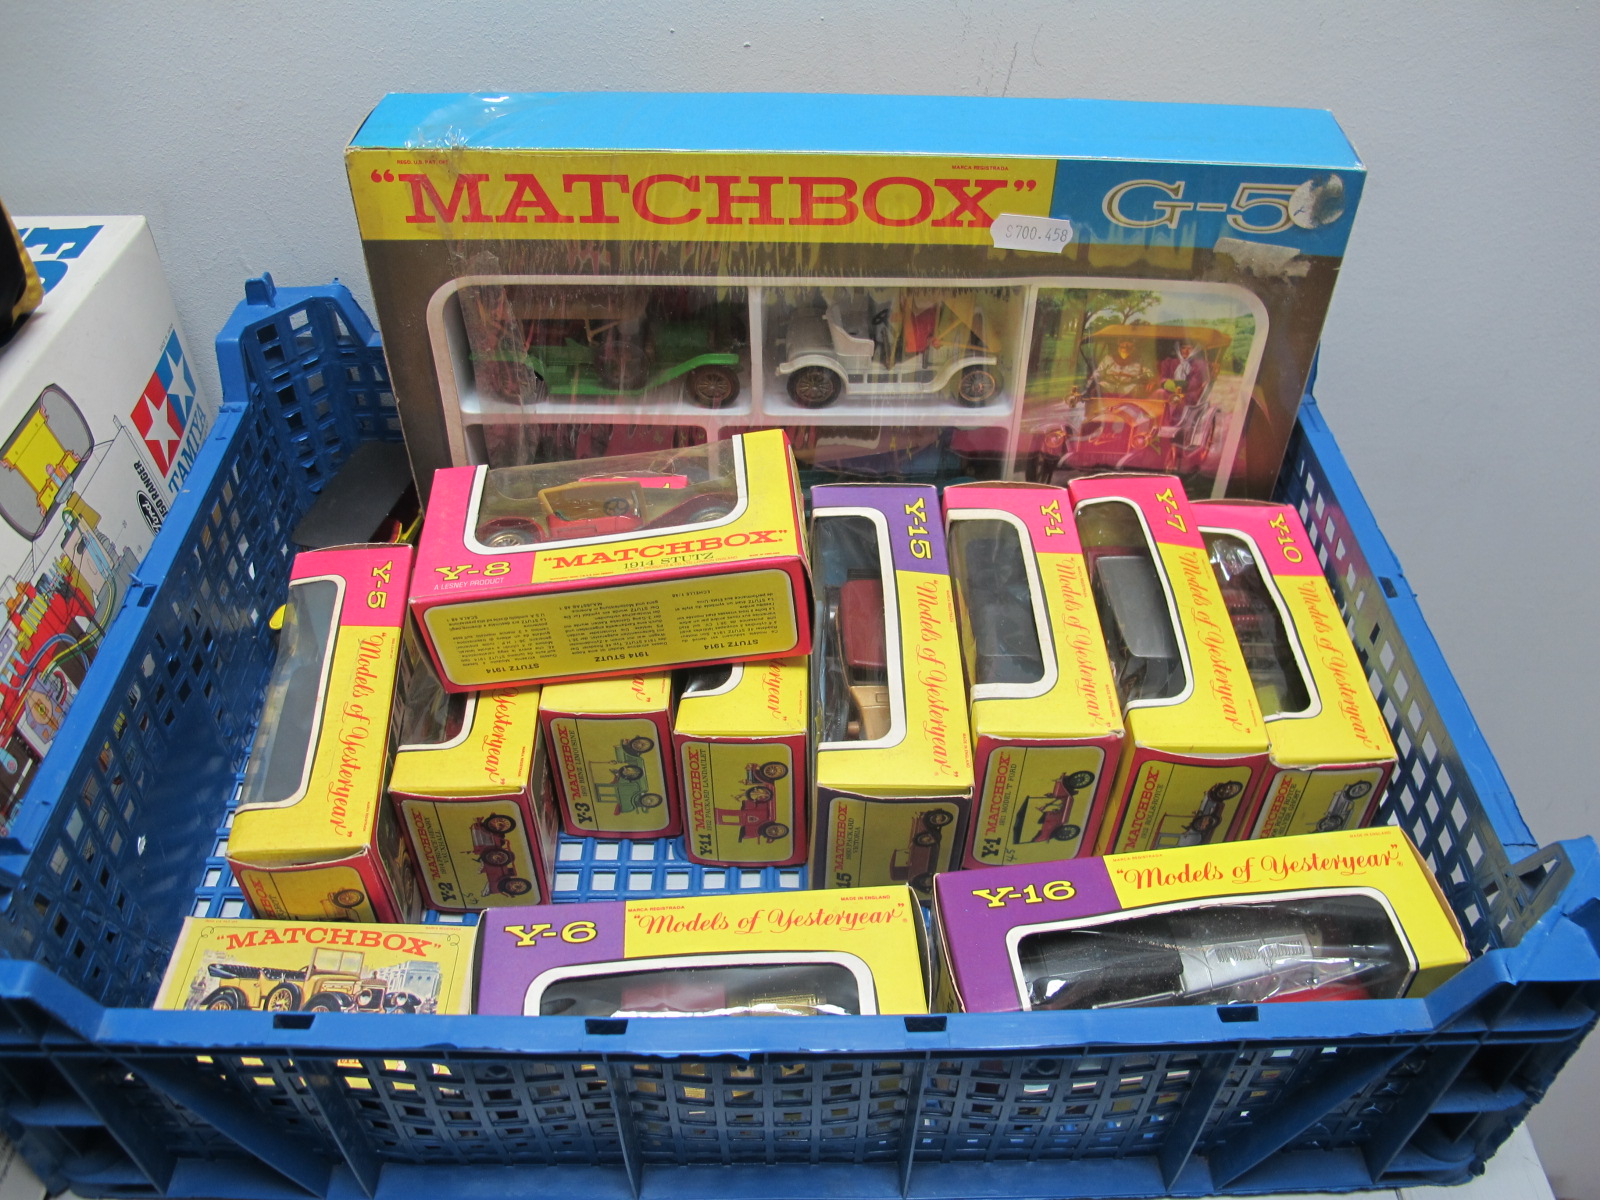 Sixteen Matchbox Models of Yesteryear Diecast Model Vehicles, including HG-5 four vehicle set,